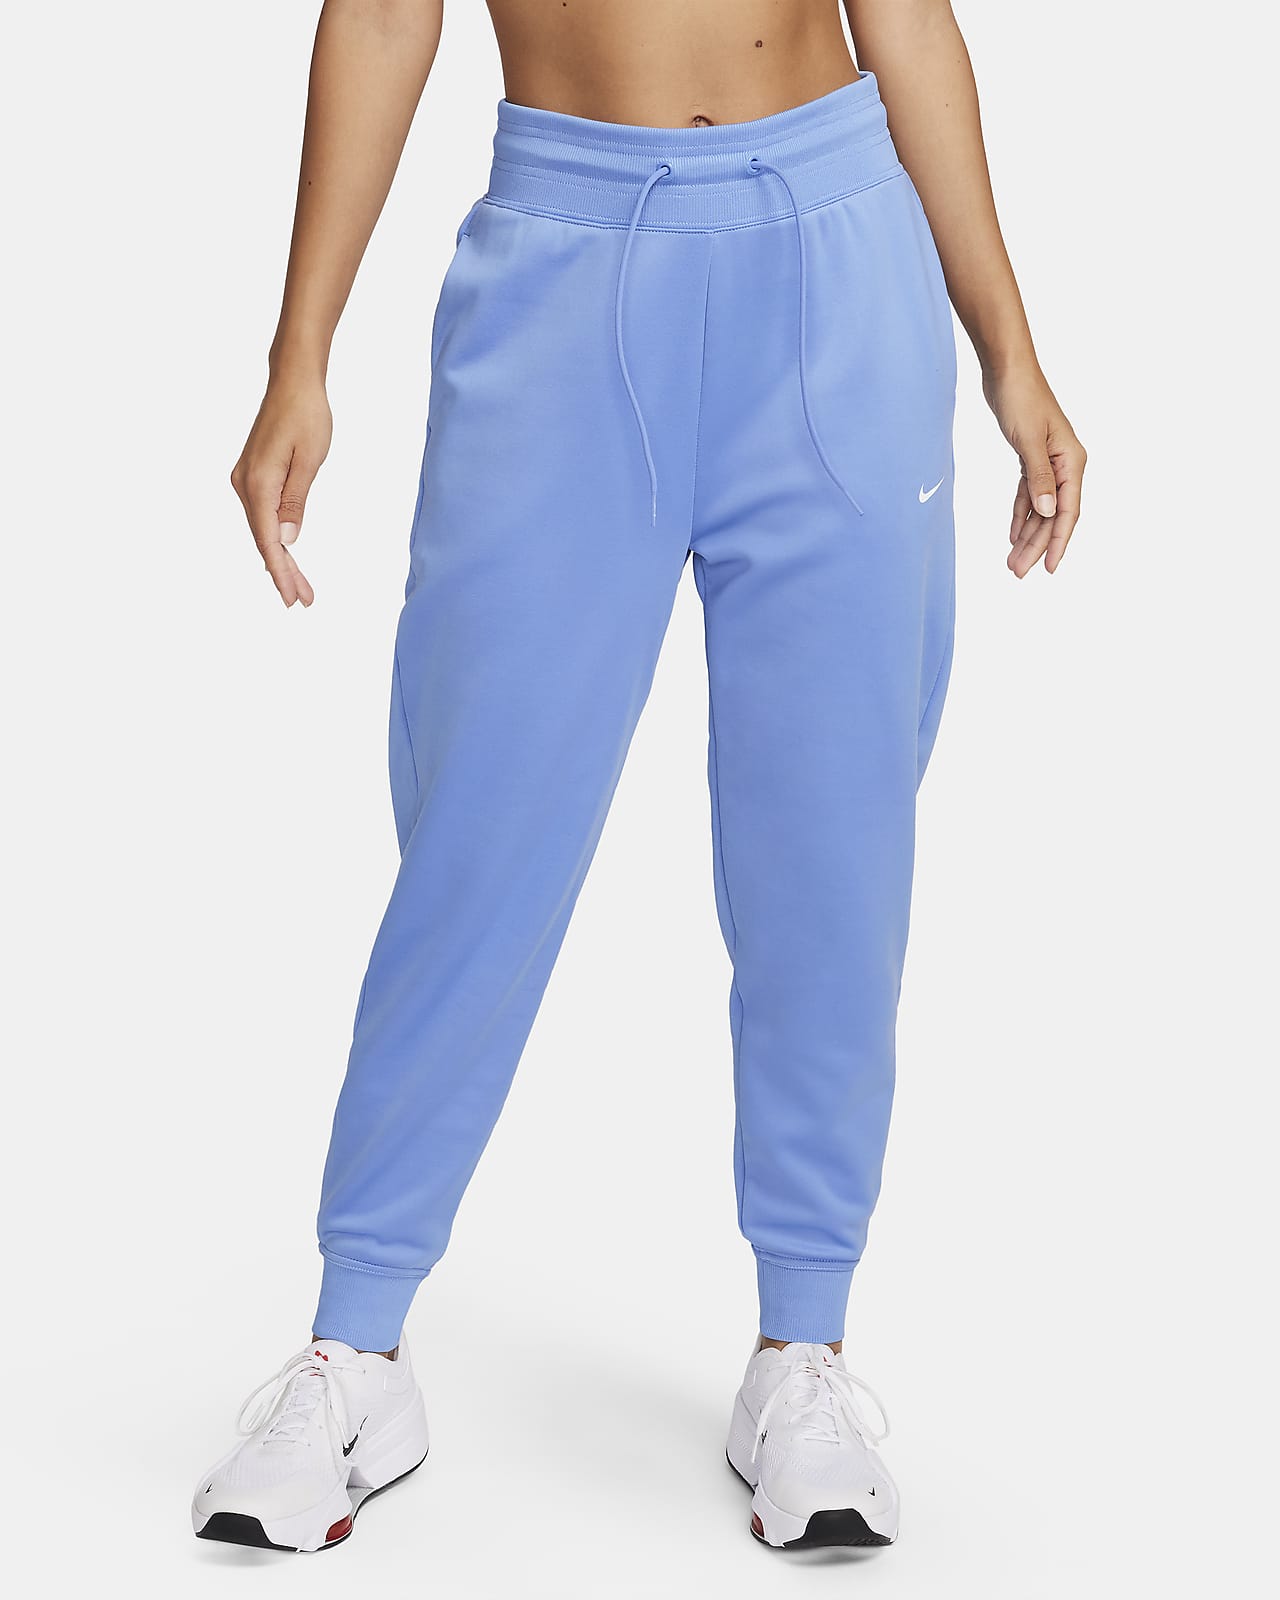 jogging suit womens nike - OFF-62% >Free Delivery